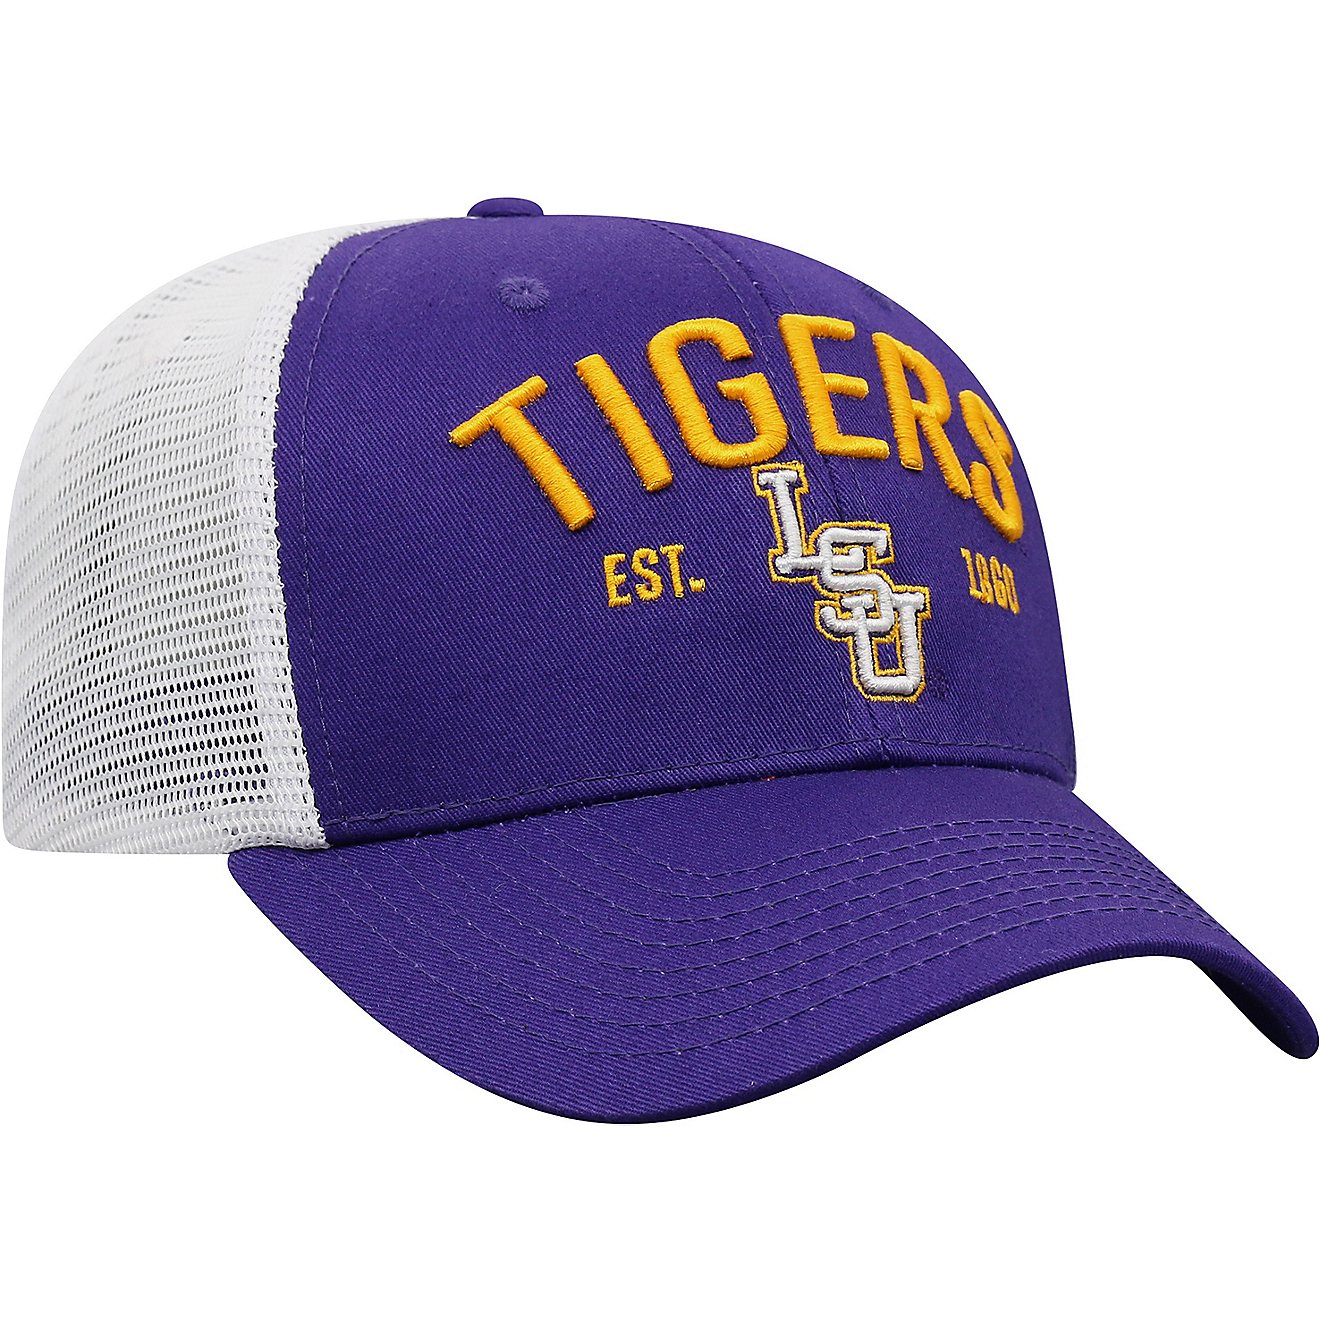 Top of the World Men's Louisiana State University Cotton and Hard Mesh Cap                                                       - view number 3